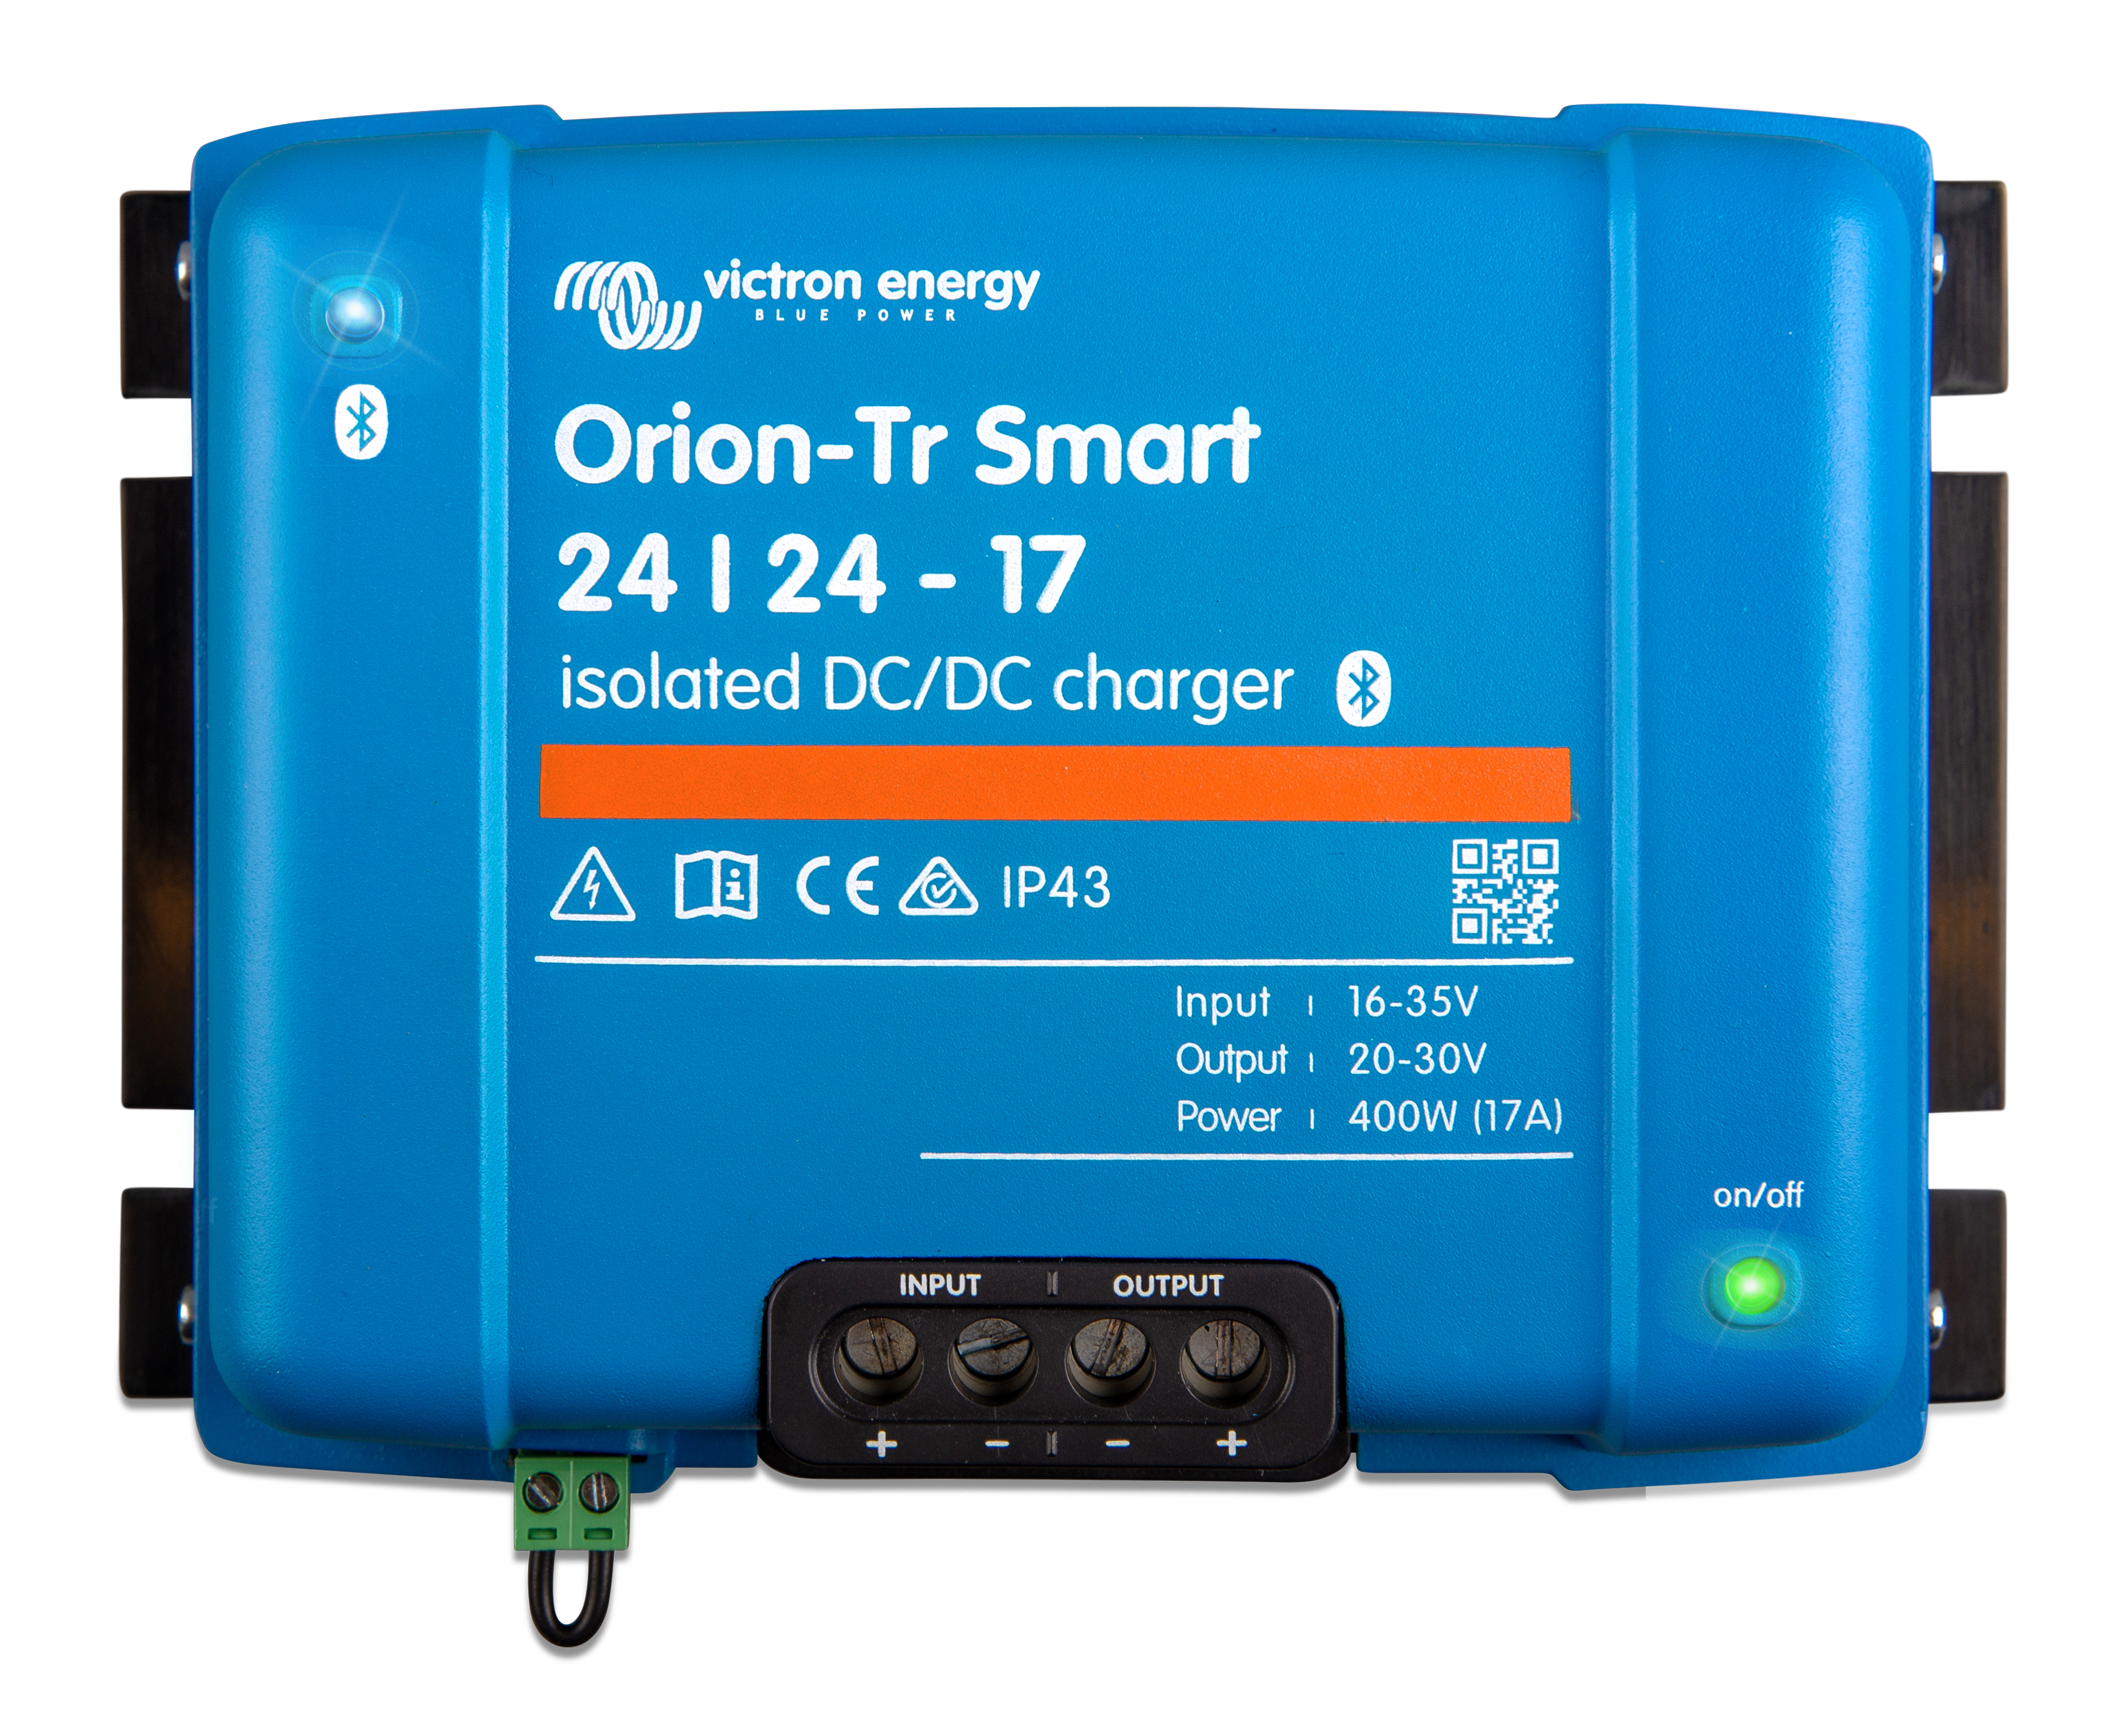 What's the input voltage range for the Victron Orion-Tr Smart 24/24-17A Isolated DC-DC charger?